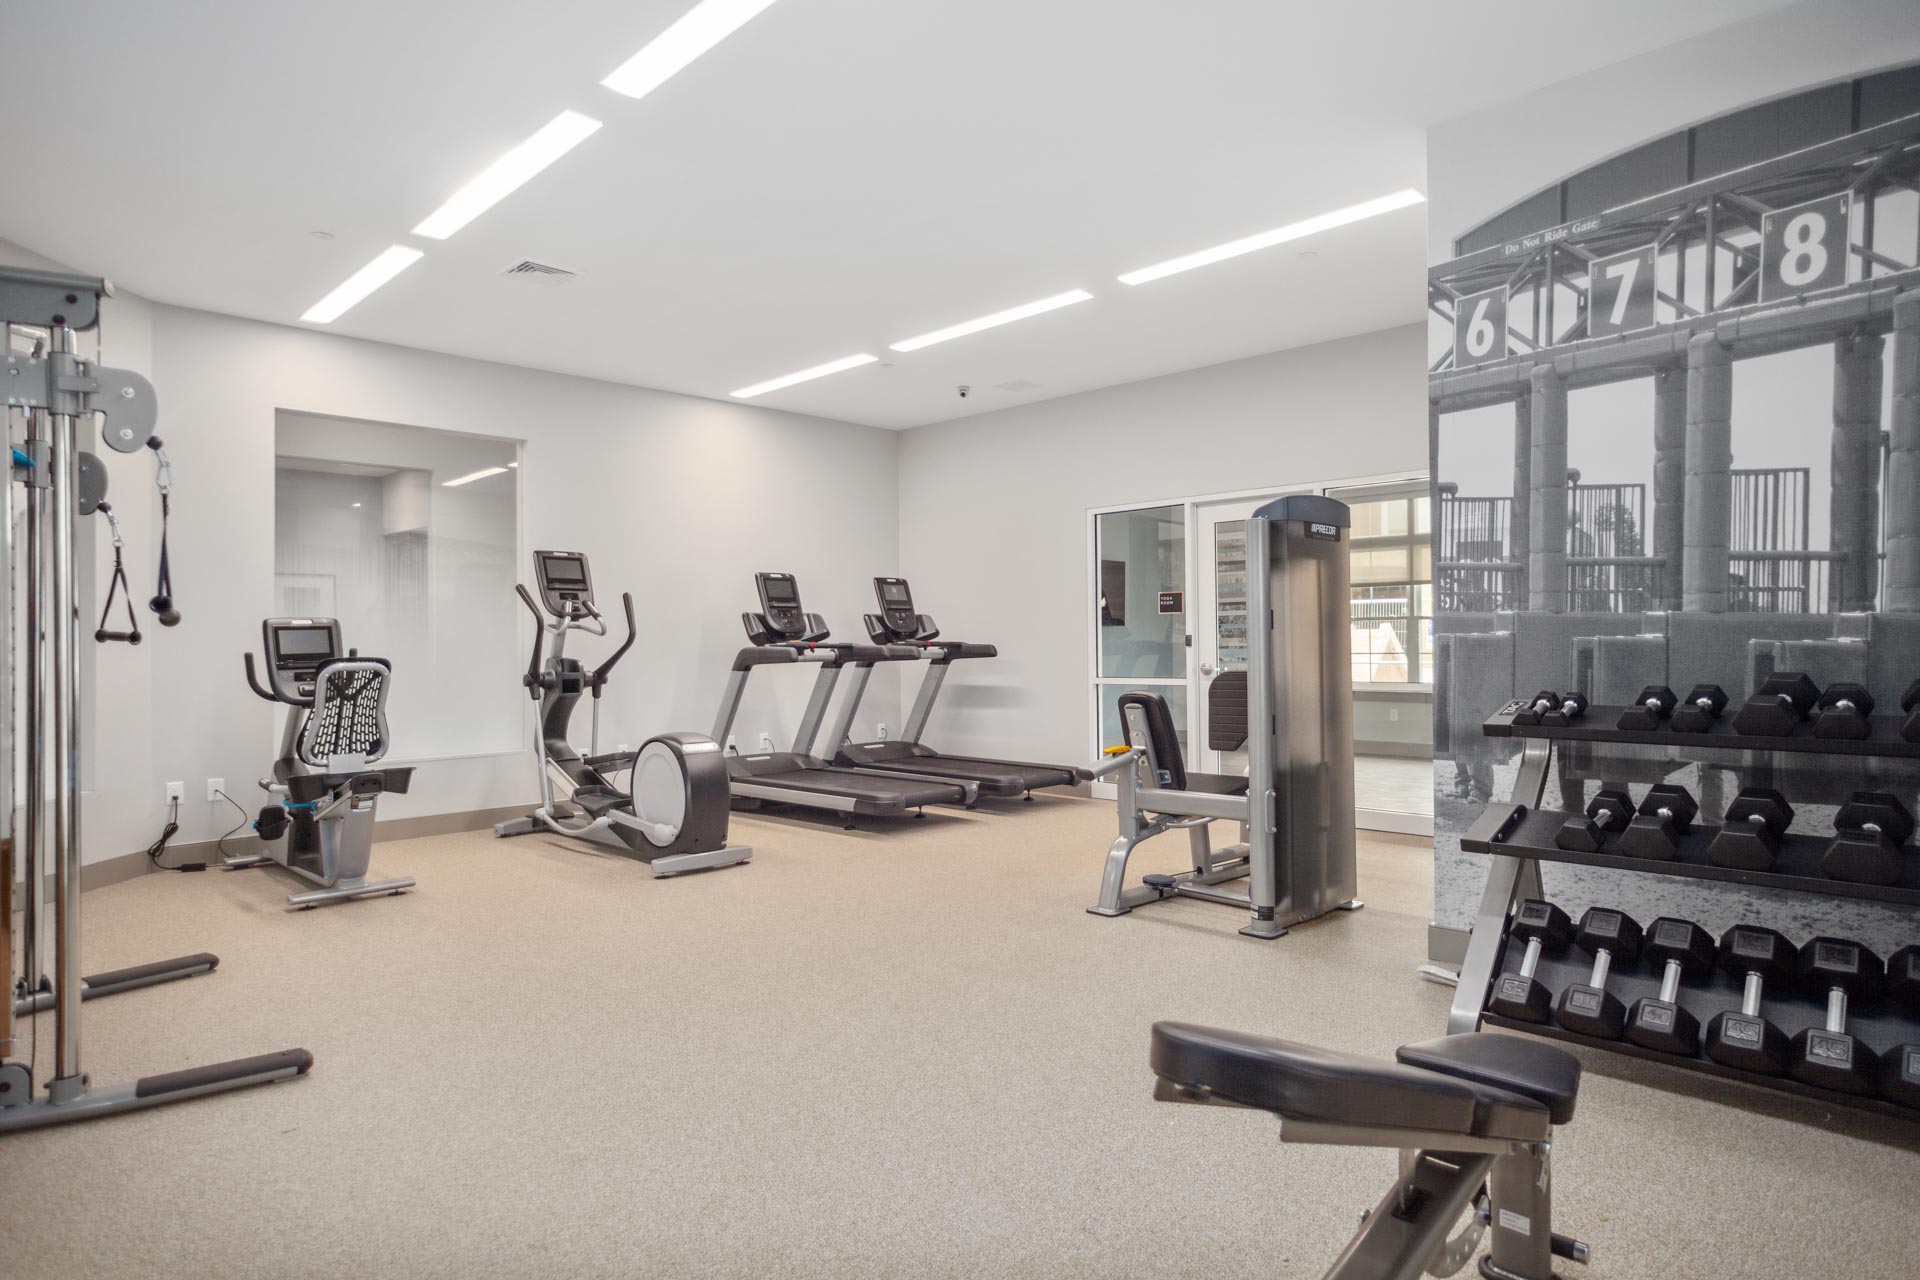 The resident fitness center inside the Corsa Apartments in Salem, New Hampshire